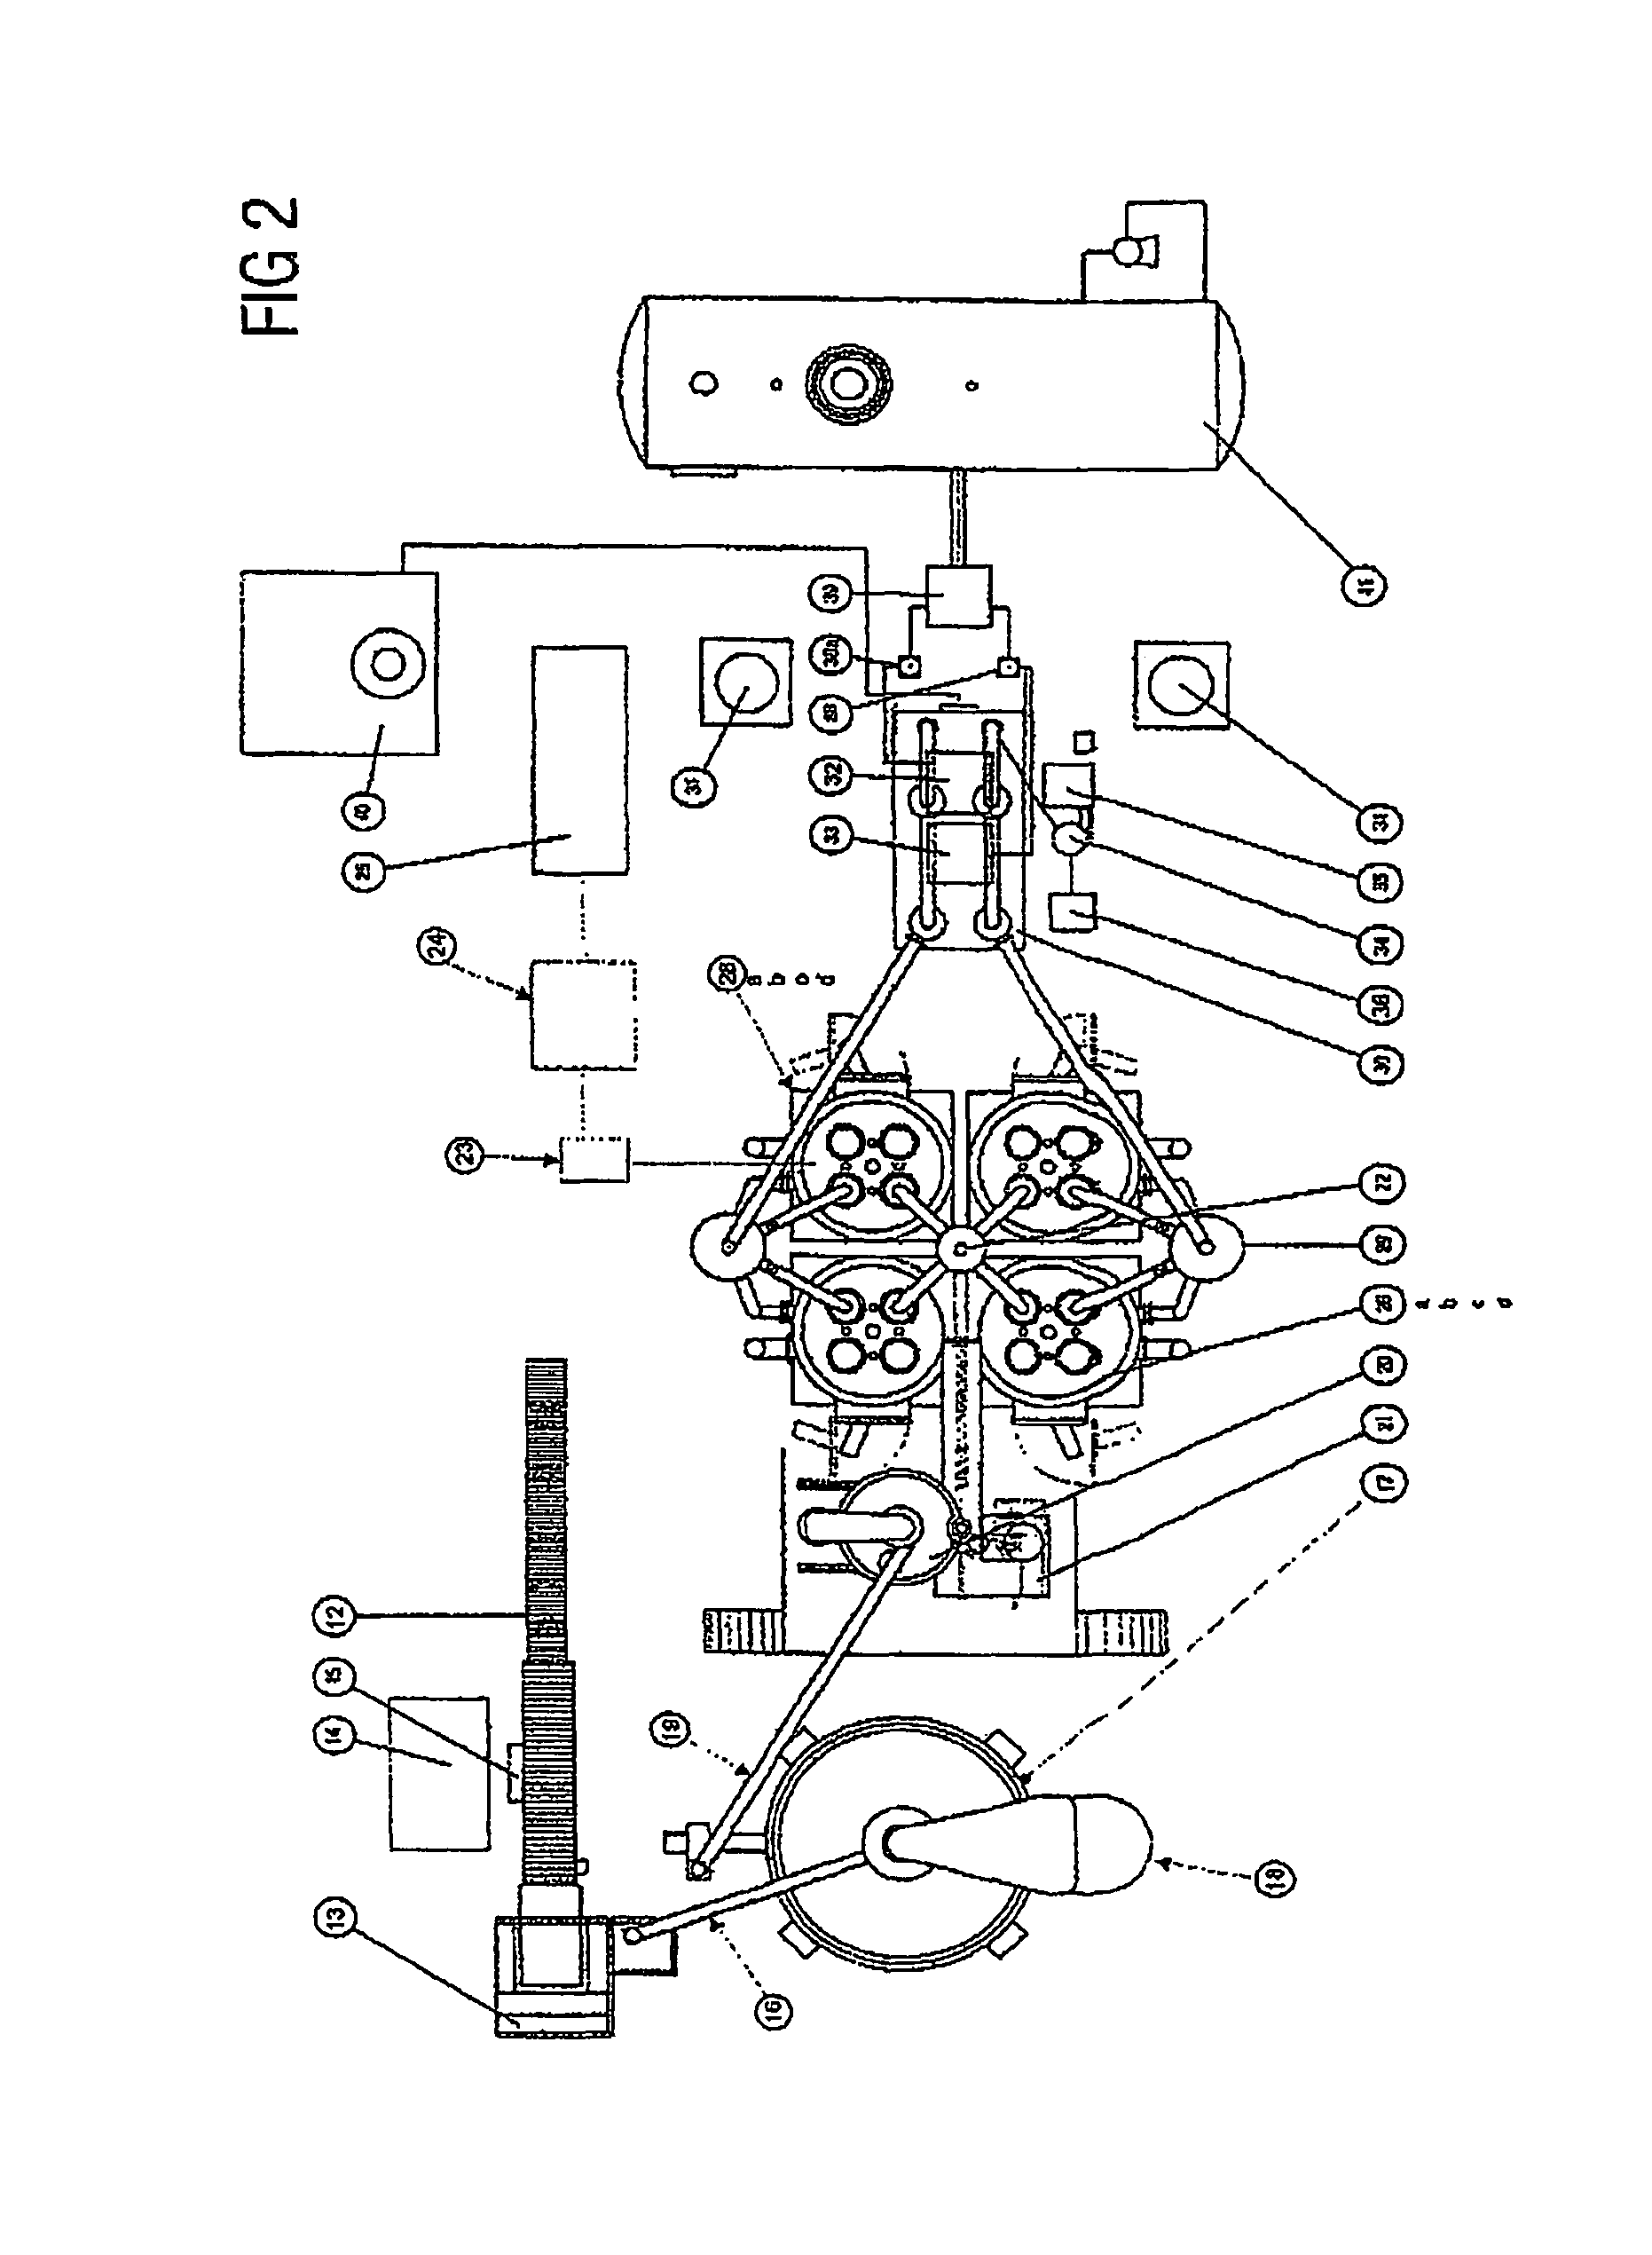 Process and plant for conversion of waste material to liquid fuel